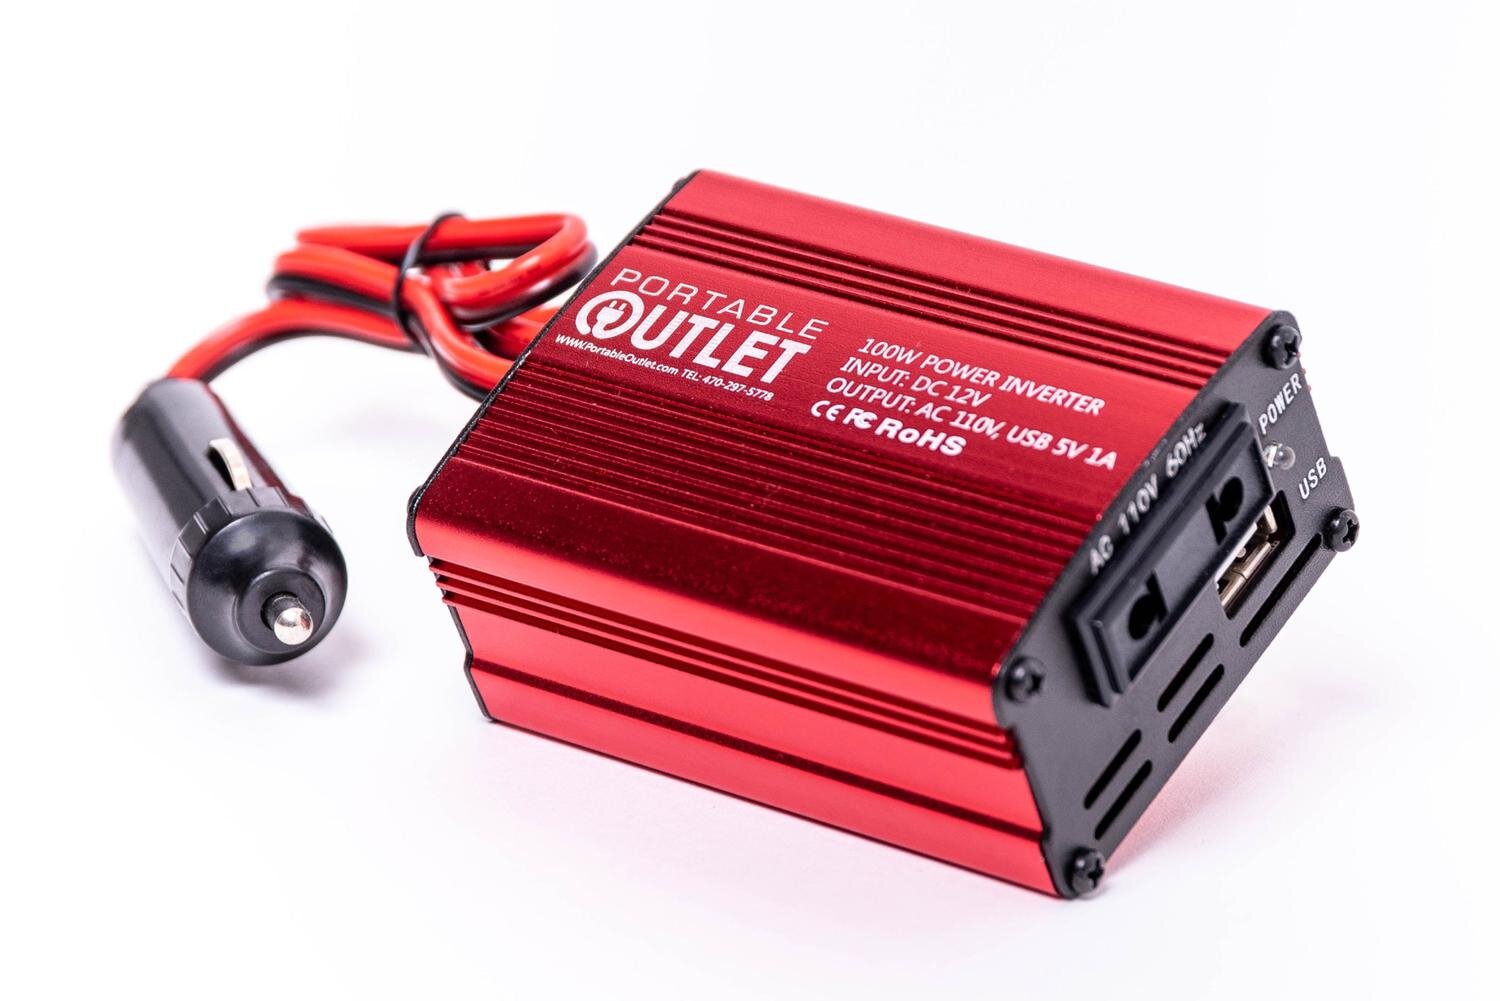 DC INPUT with an AC OUTLET Portable Power Inverter 